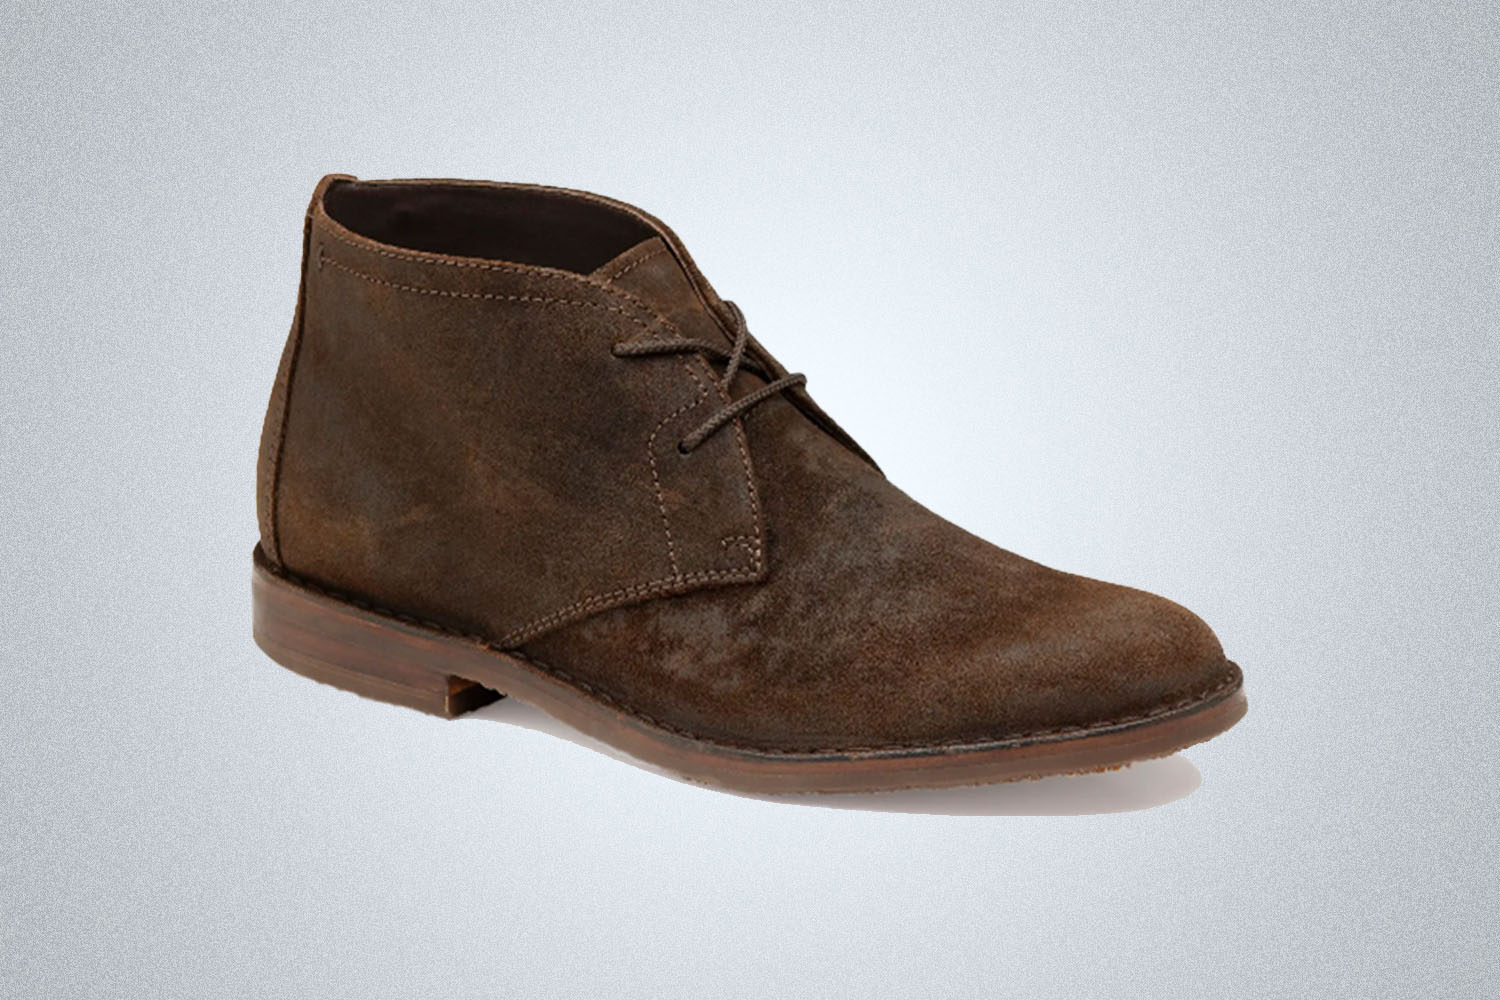 a pair of brown suede chukka boots from Johnston and Murphy on a grey background